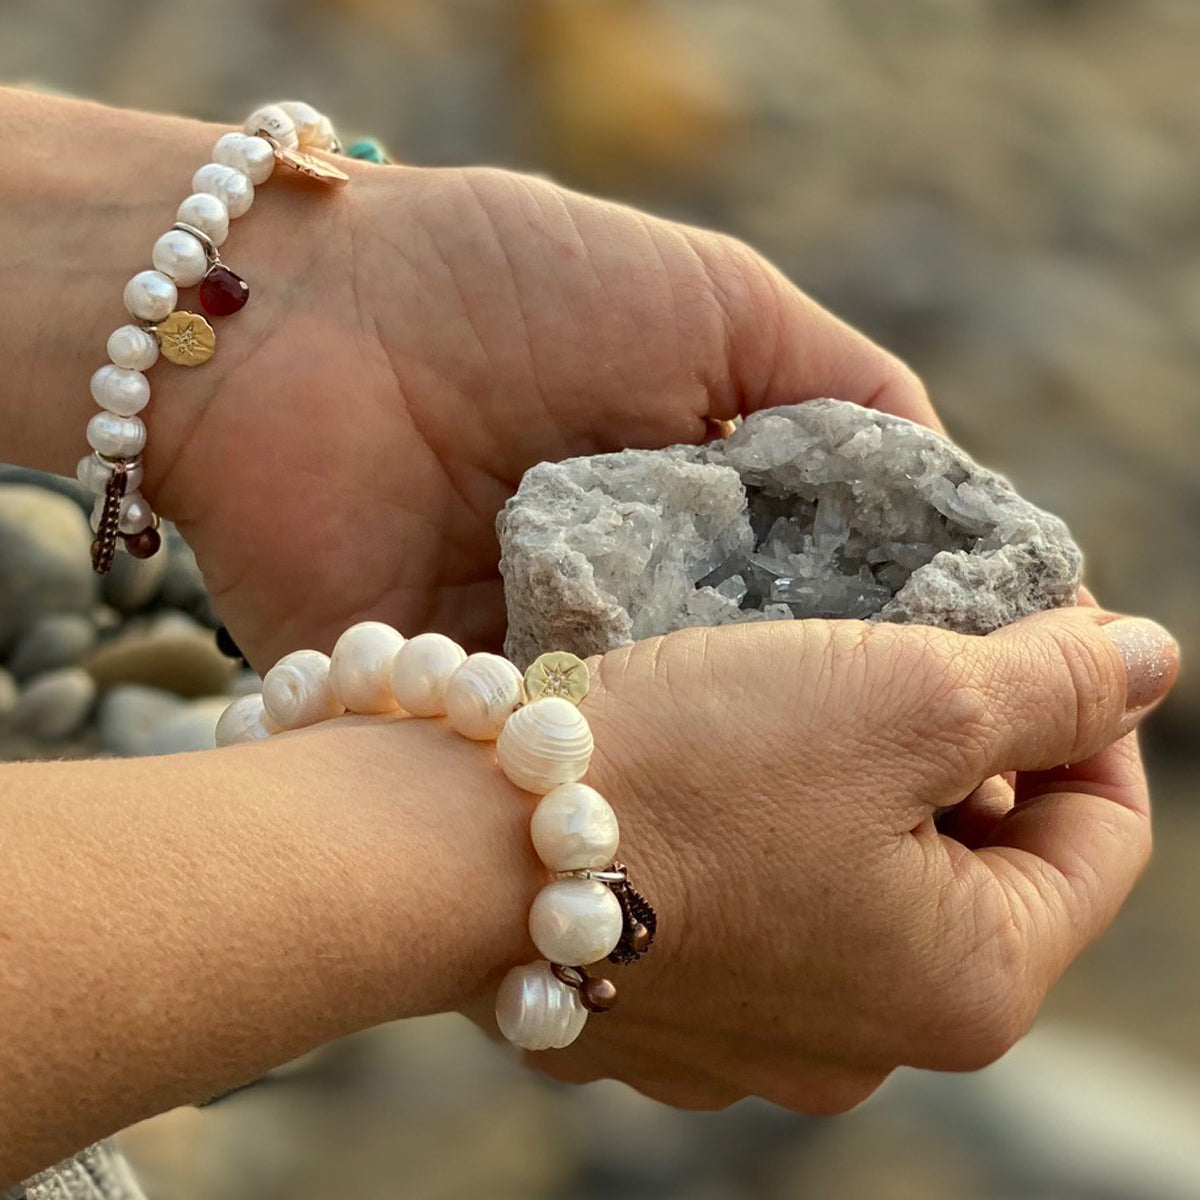 Find Your True North Pearl Bracelet with Silver, Gold, Brass and Rose Gold Charms. Just as a compass points toward a magnetic field, your personal “true north” directs your path and pulls you forward. Pearl is the "Stone of Truth, Faith and Love," enhances personal integrity and helps provide focus.